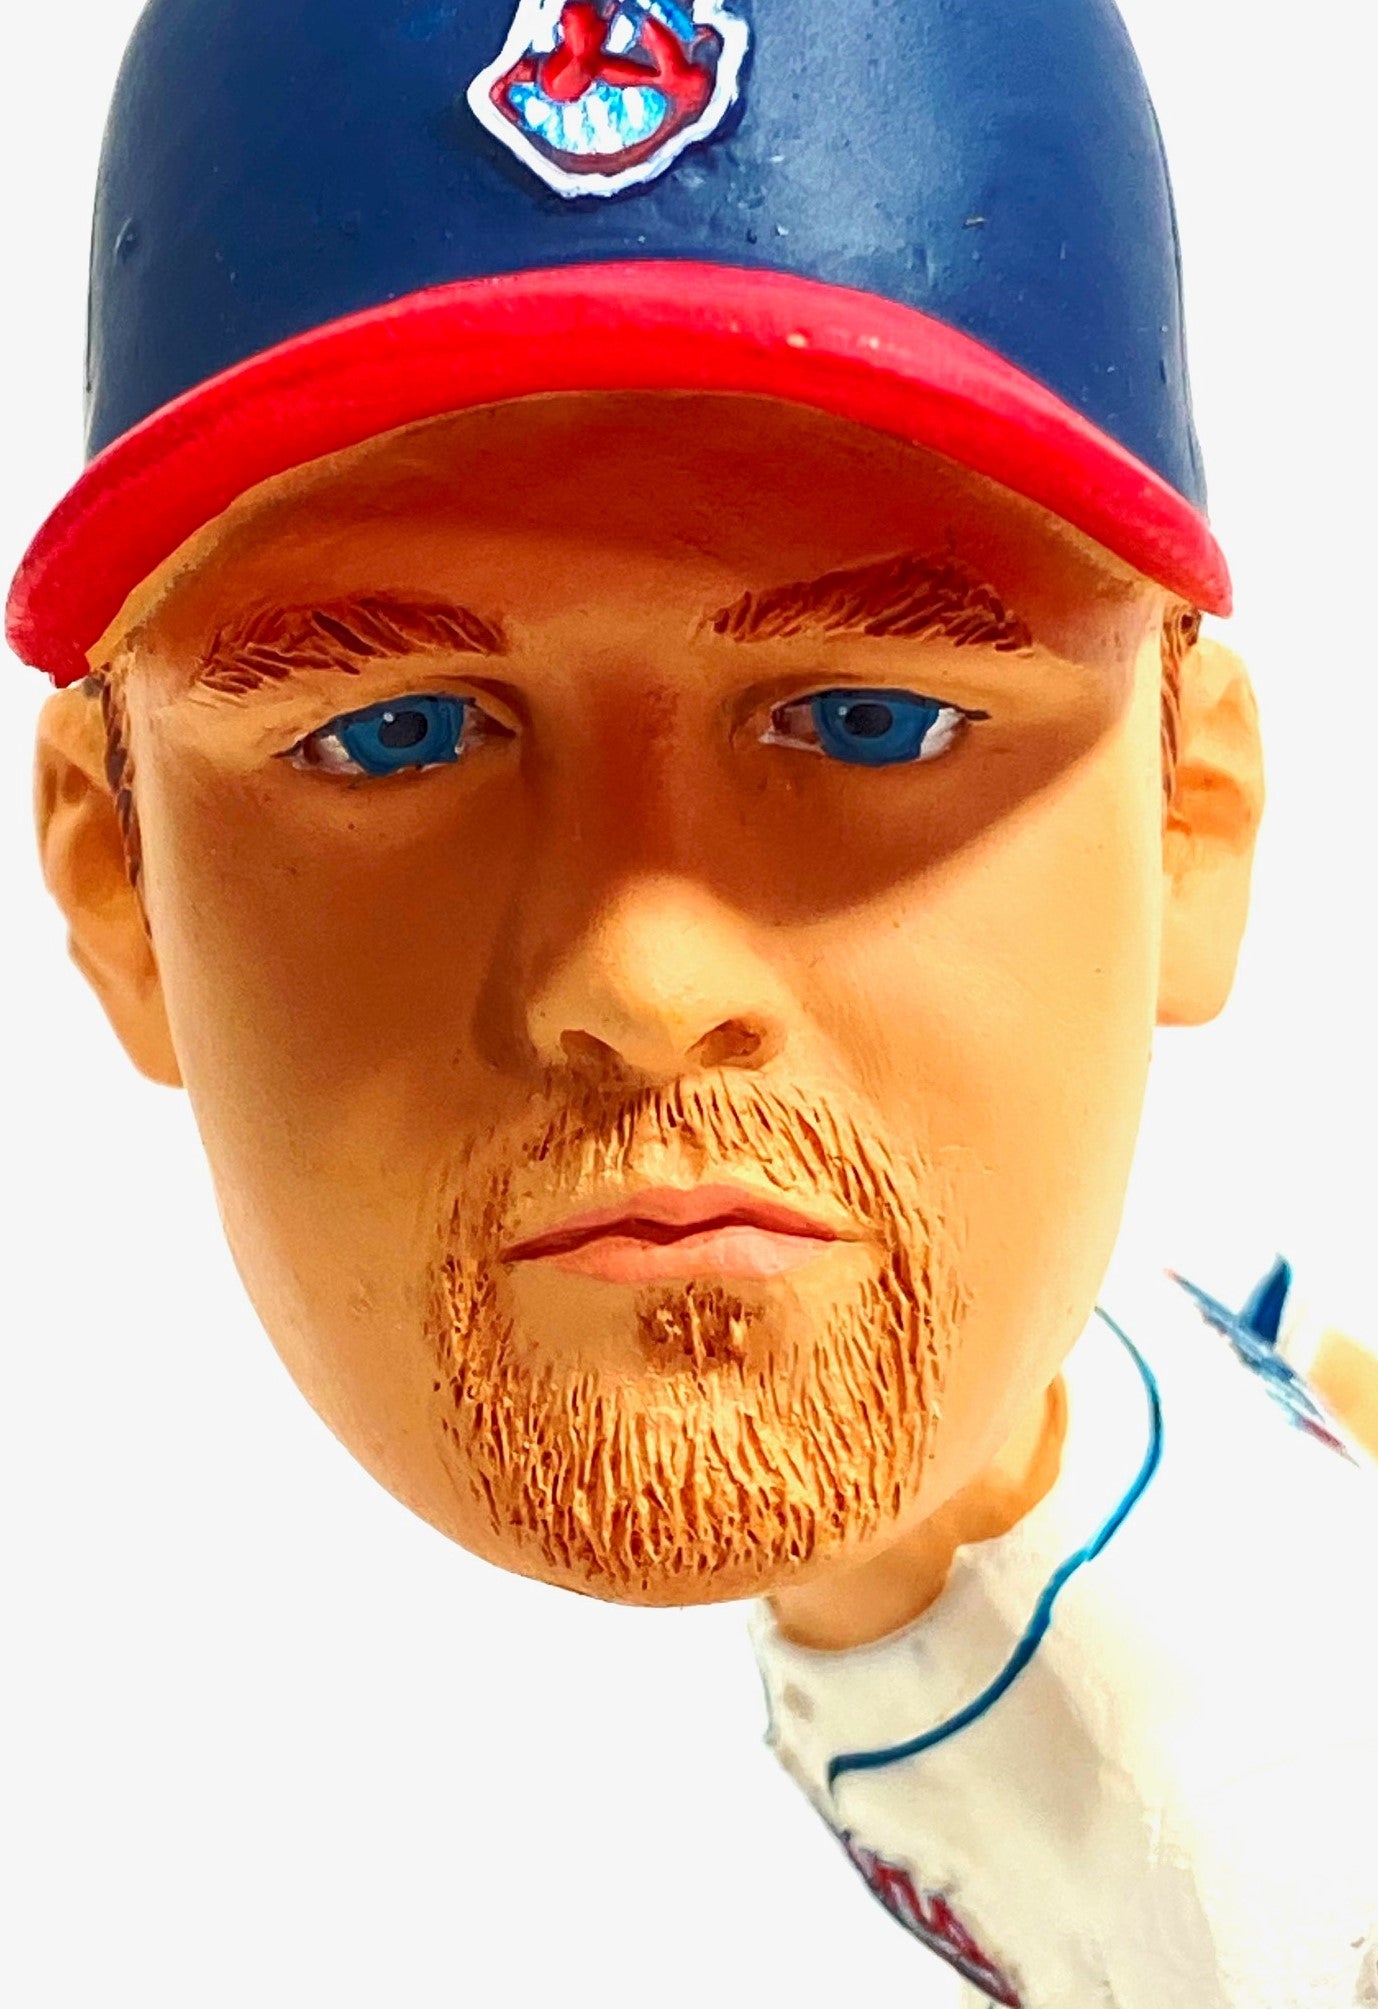 Kerry Wood 2009 MLB Cleveland Indians Mini-Bobblehead (Used) by BD&A